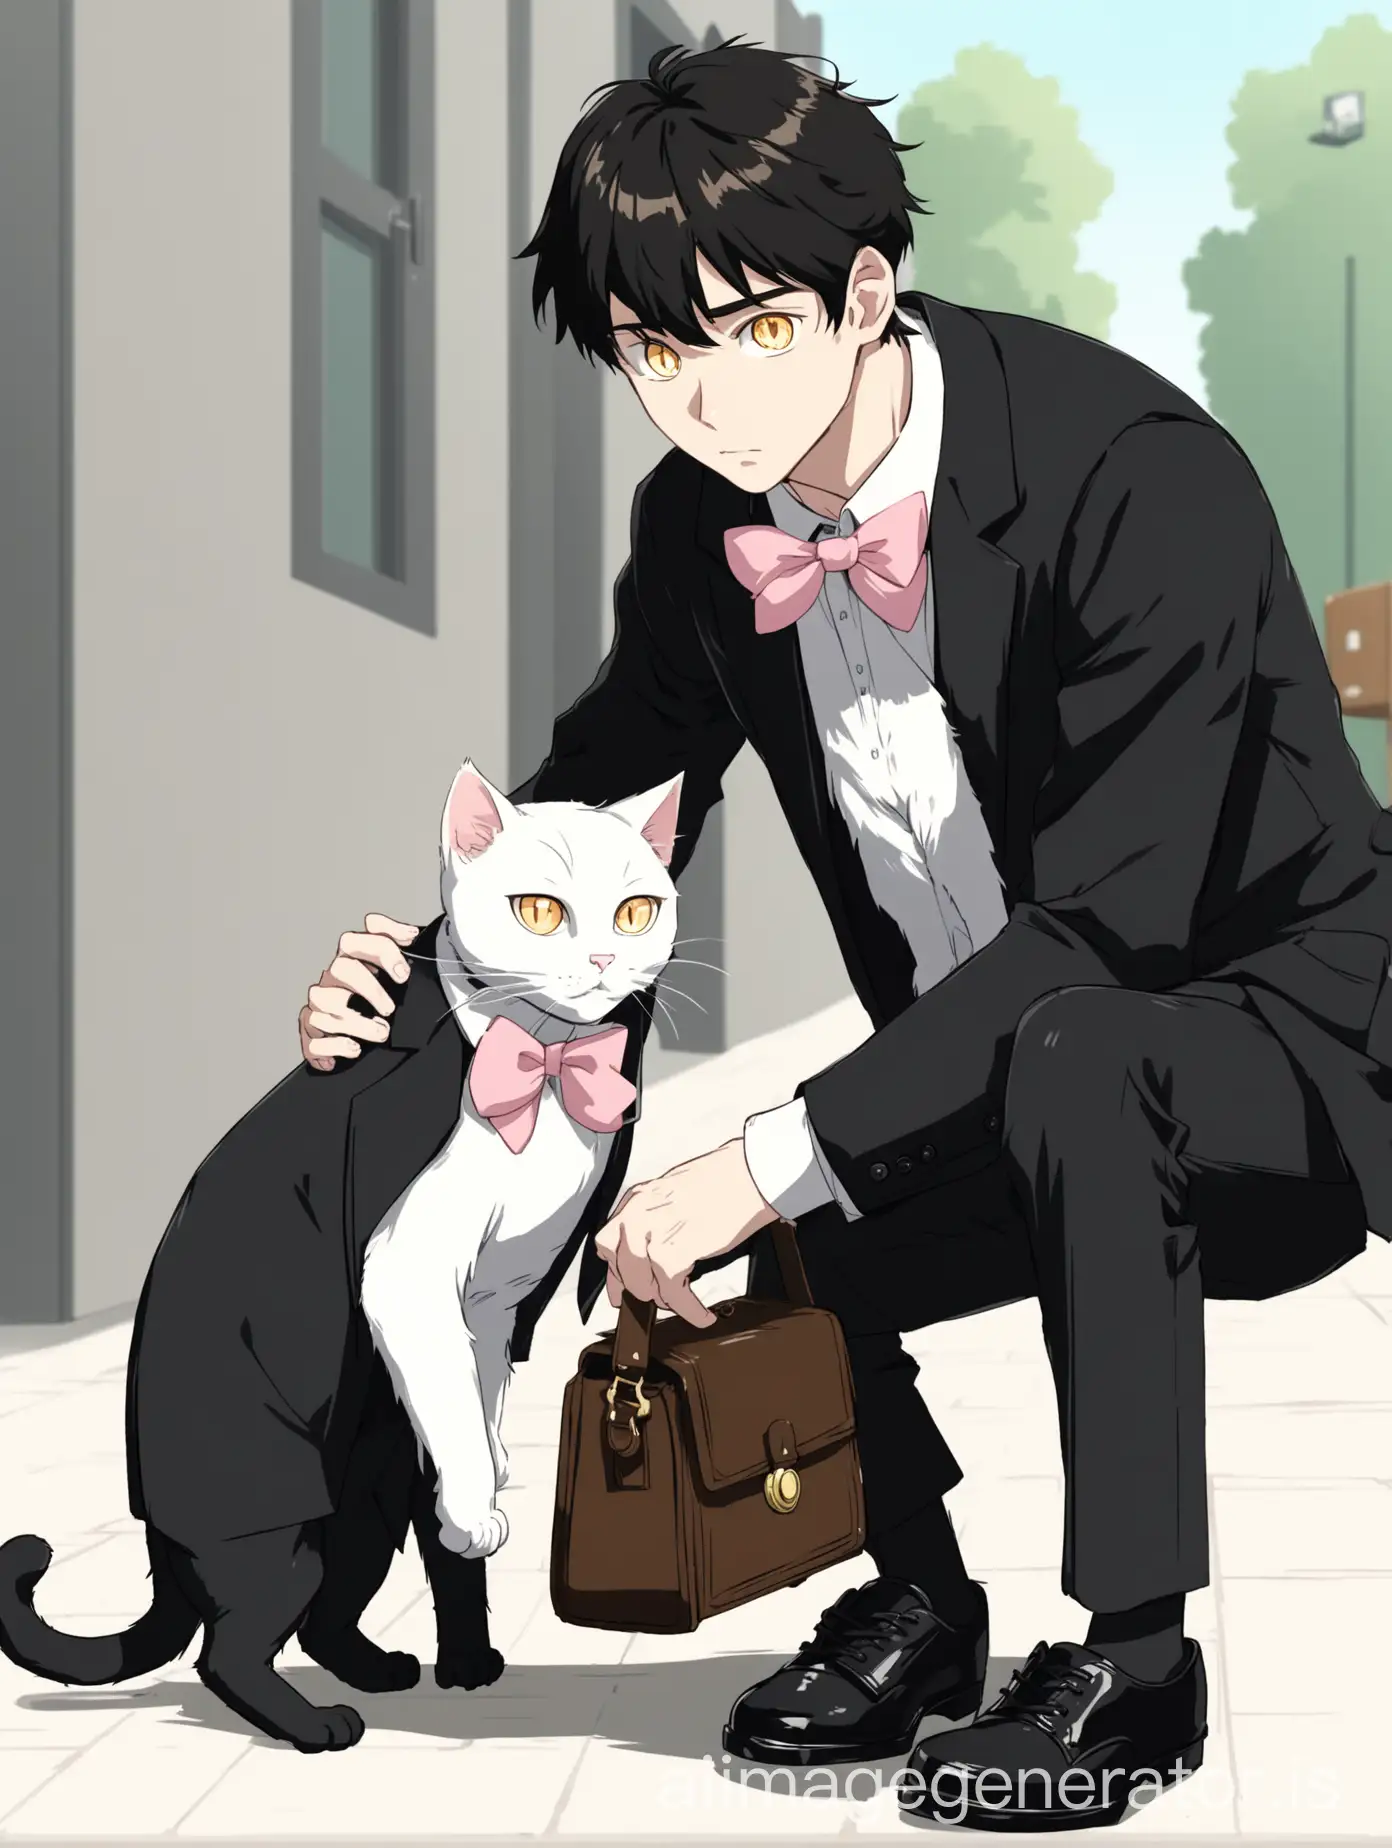 Animated style, golden-eyed male black cat with a camera for a white cat, black cat wears a black school uniform, white shirt, black pants, black shoes, white cat wears a white shirt, pink bow tie, black skirt, holding brown bag in front of knees, bending down looking at the camera